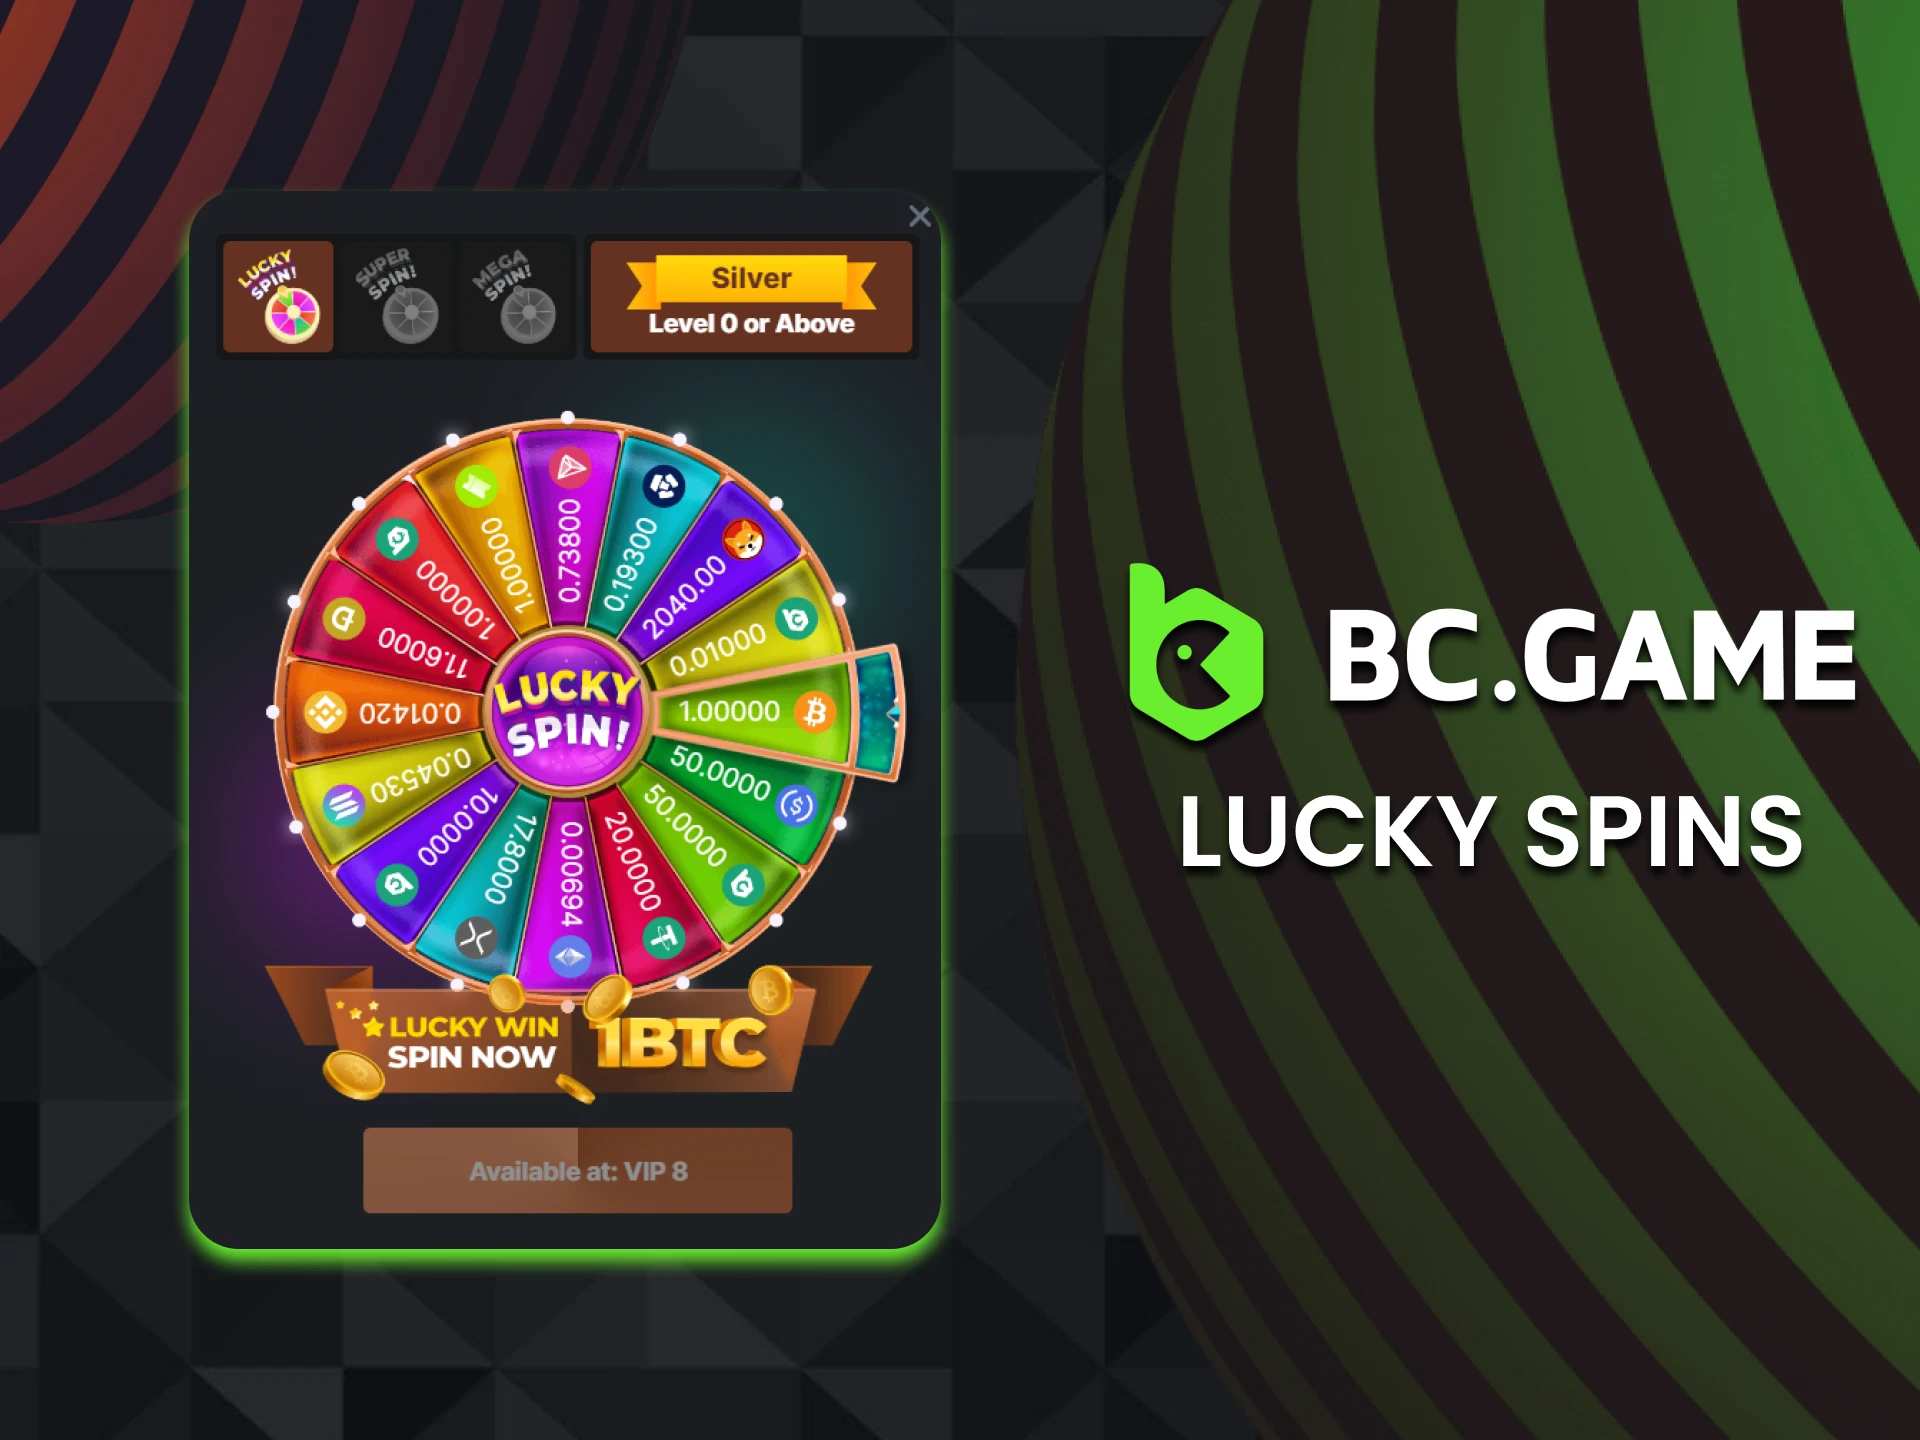 Spin the wheel and get BC Game Lucky Spin bonus.